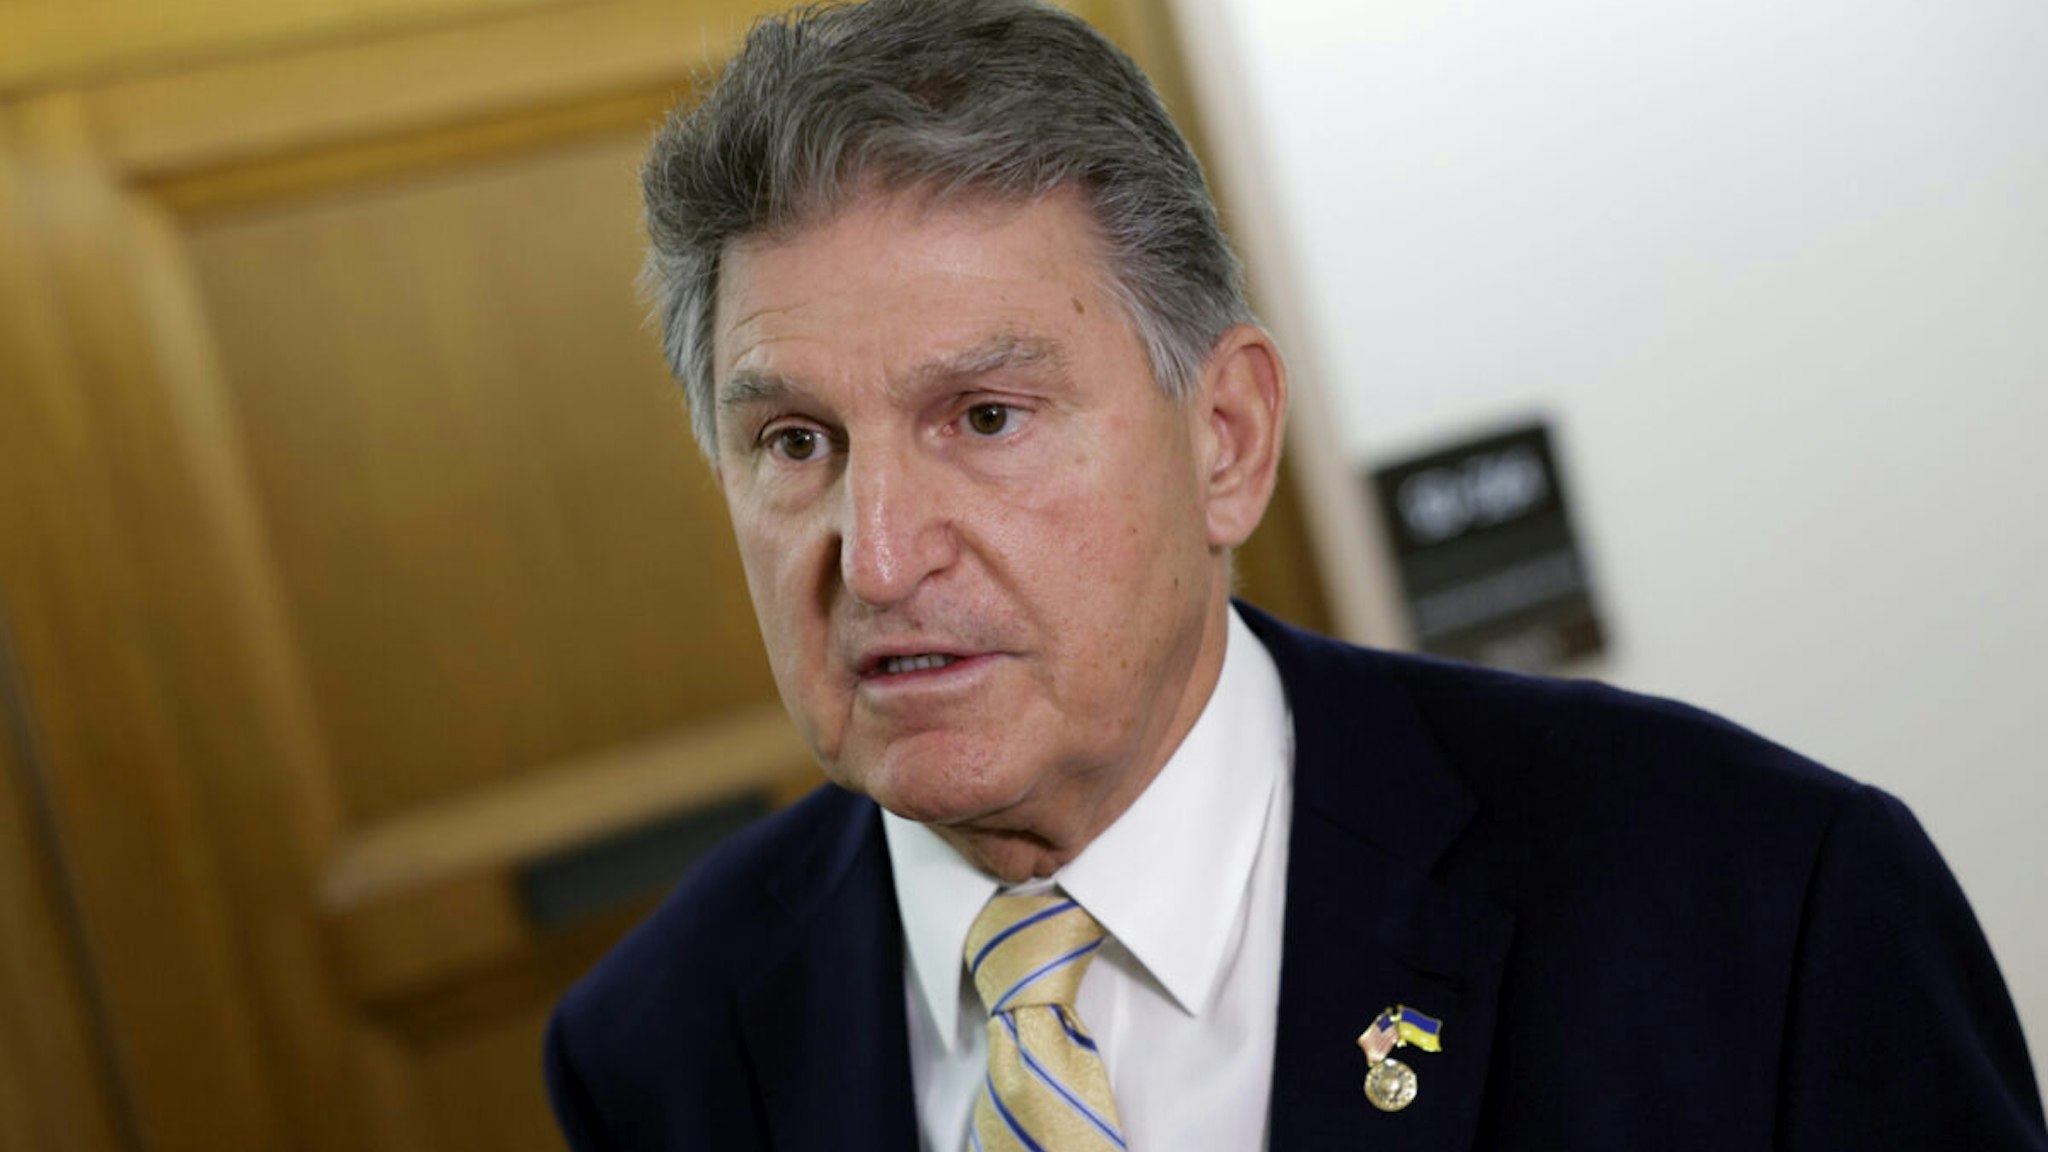 Sen. Joe Manchin (D-WV), Chairman of the Senate Energy and Natural Resources Committee, talks to reporters before a hearing with Interior Secretary Deb Haaland, at the Dirksen Senate Office Building on May 19, 2022 in Washington, DC